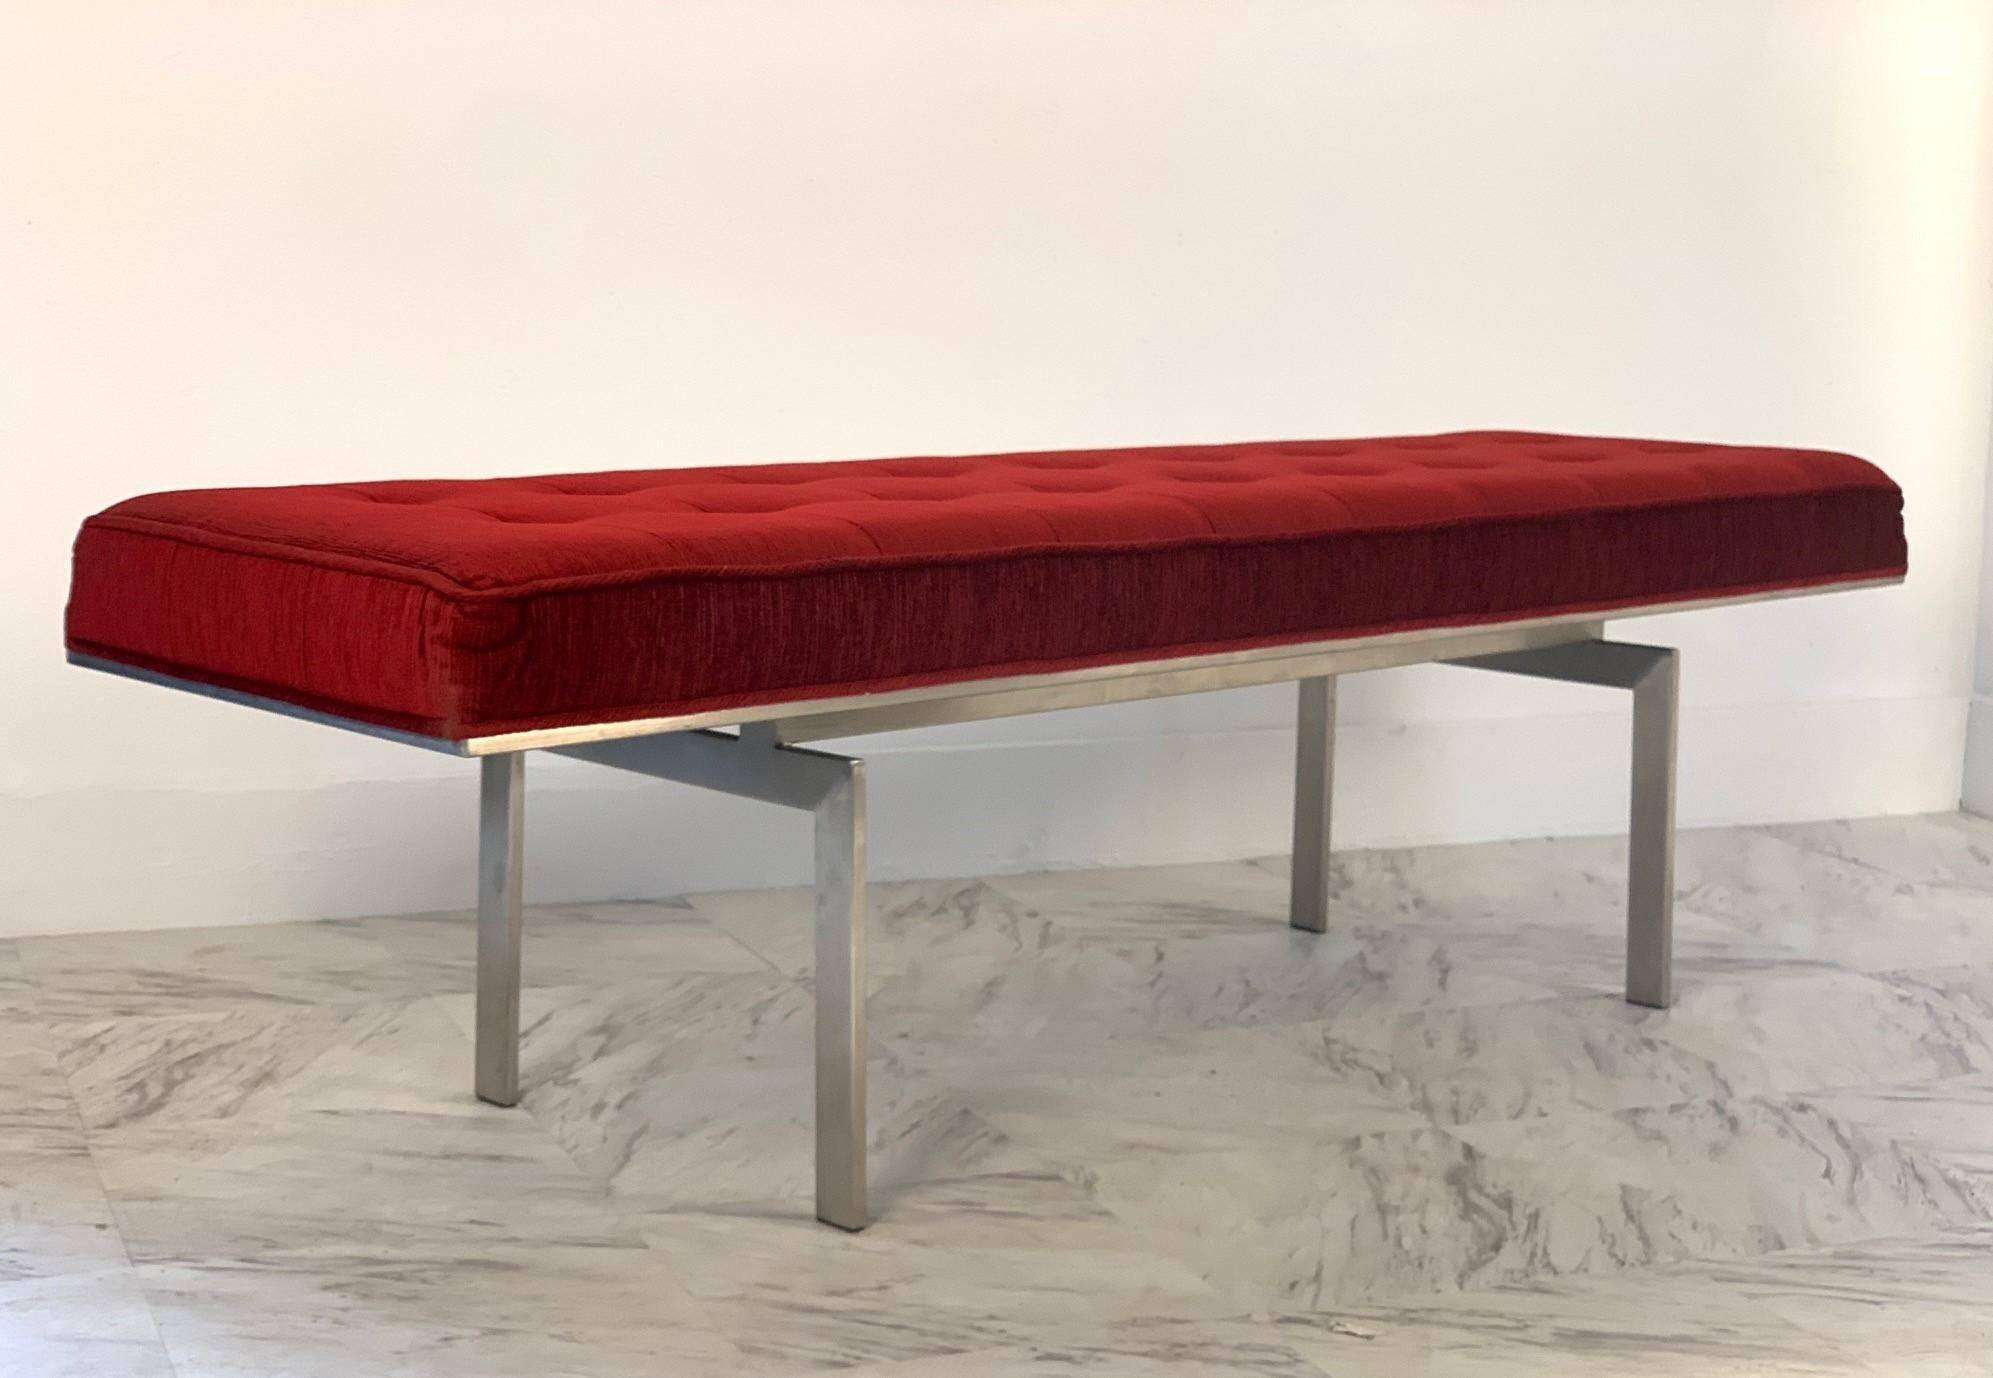 Tufted bench with a brushed steel base in the style of tufted bench style of Poul Kjærholm. Upholstery is of a plum red color. Mid-Century Modern.